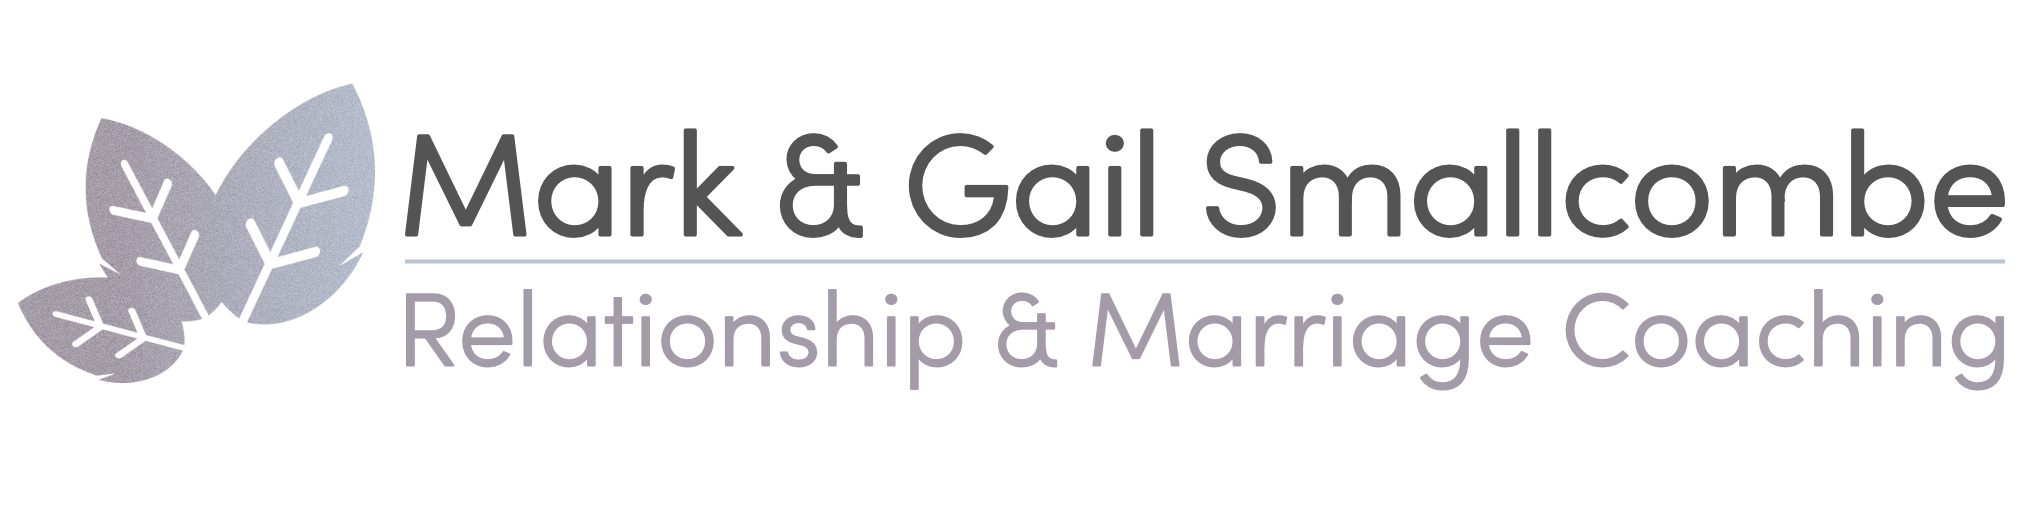 Relationship &amp; Marriage Coaching with Mark &amp; Gail Smallcombe